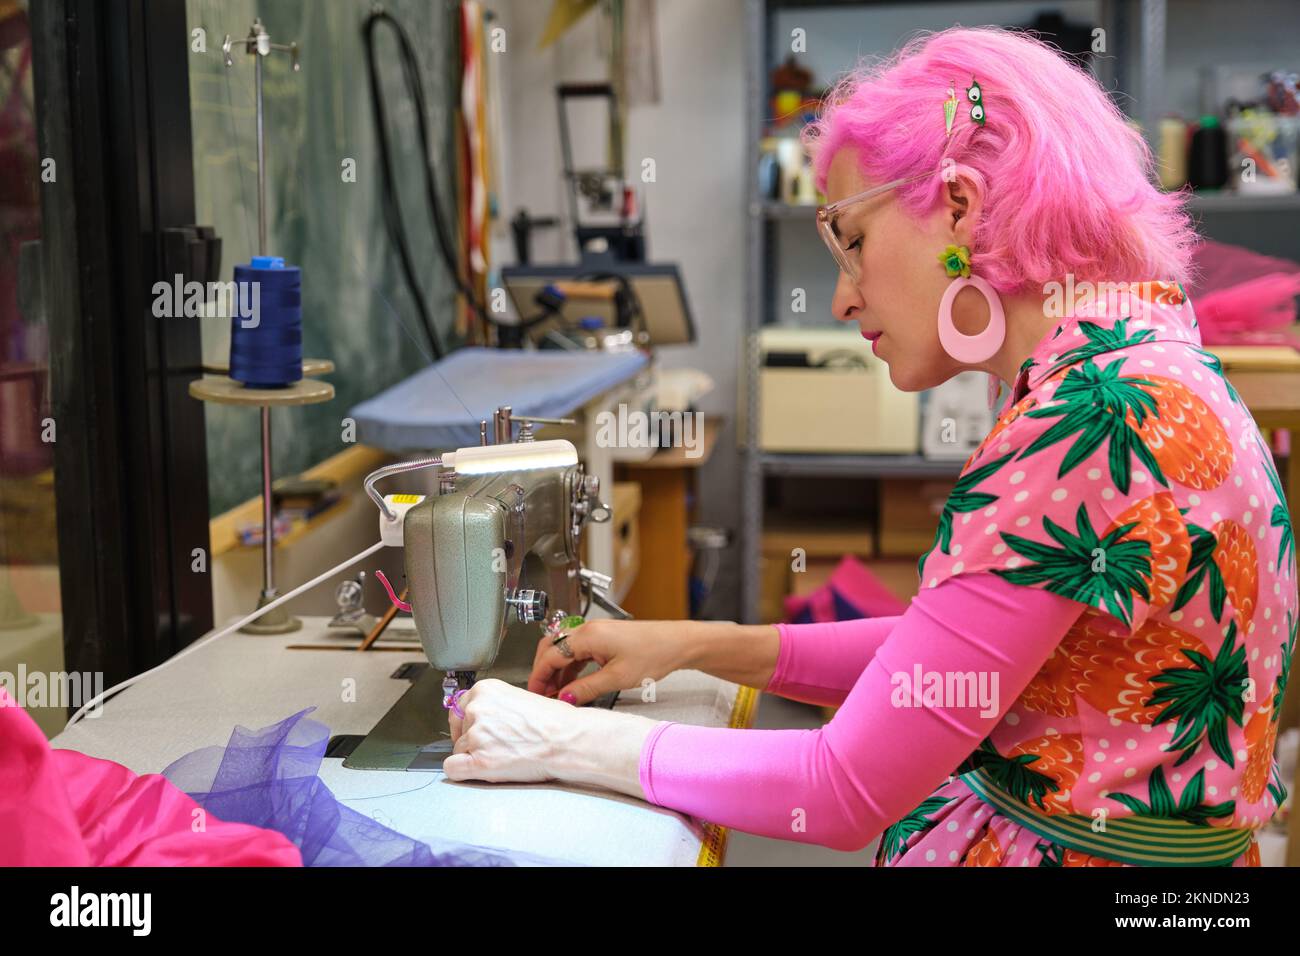 Tailor with pink hair and colorfull clothes threading sewing machine. Stock Photo